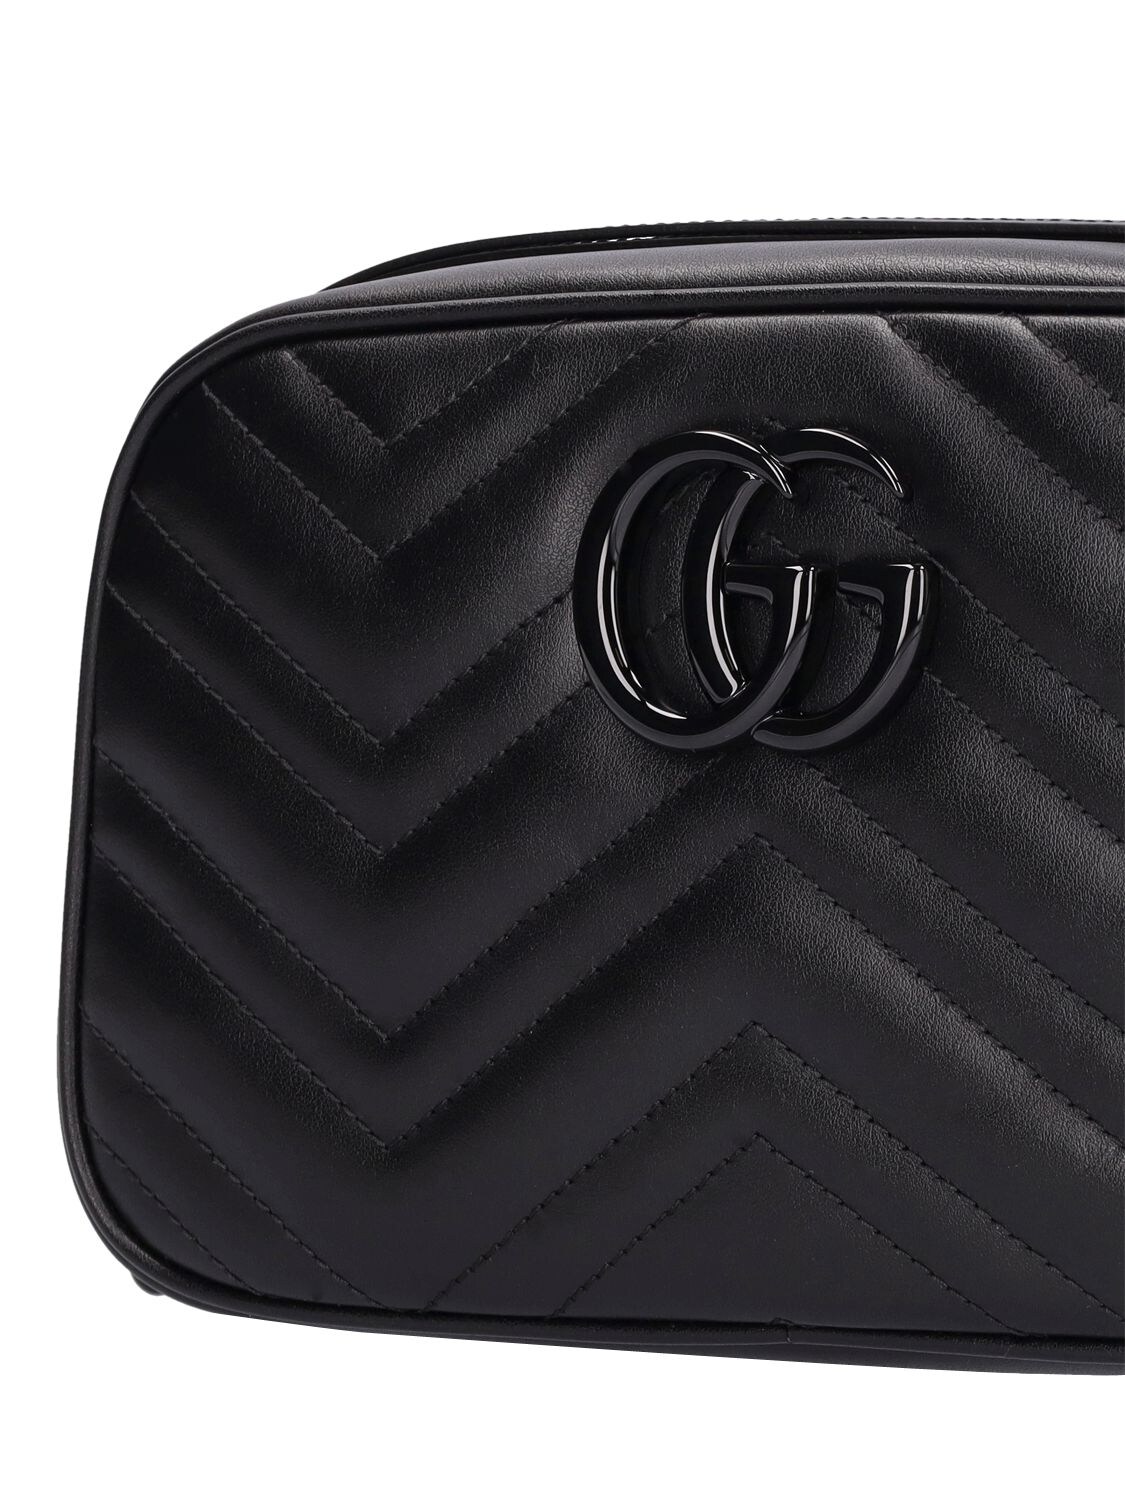 Black GG Marmont 2.0 small leather cross-body bag, Gucci